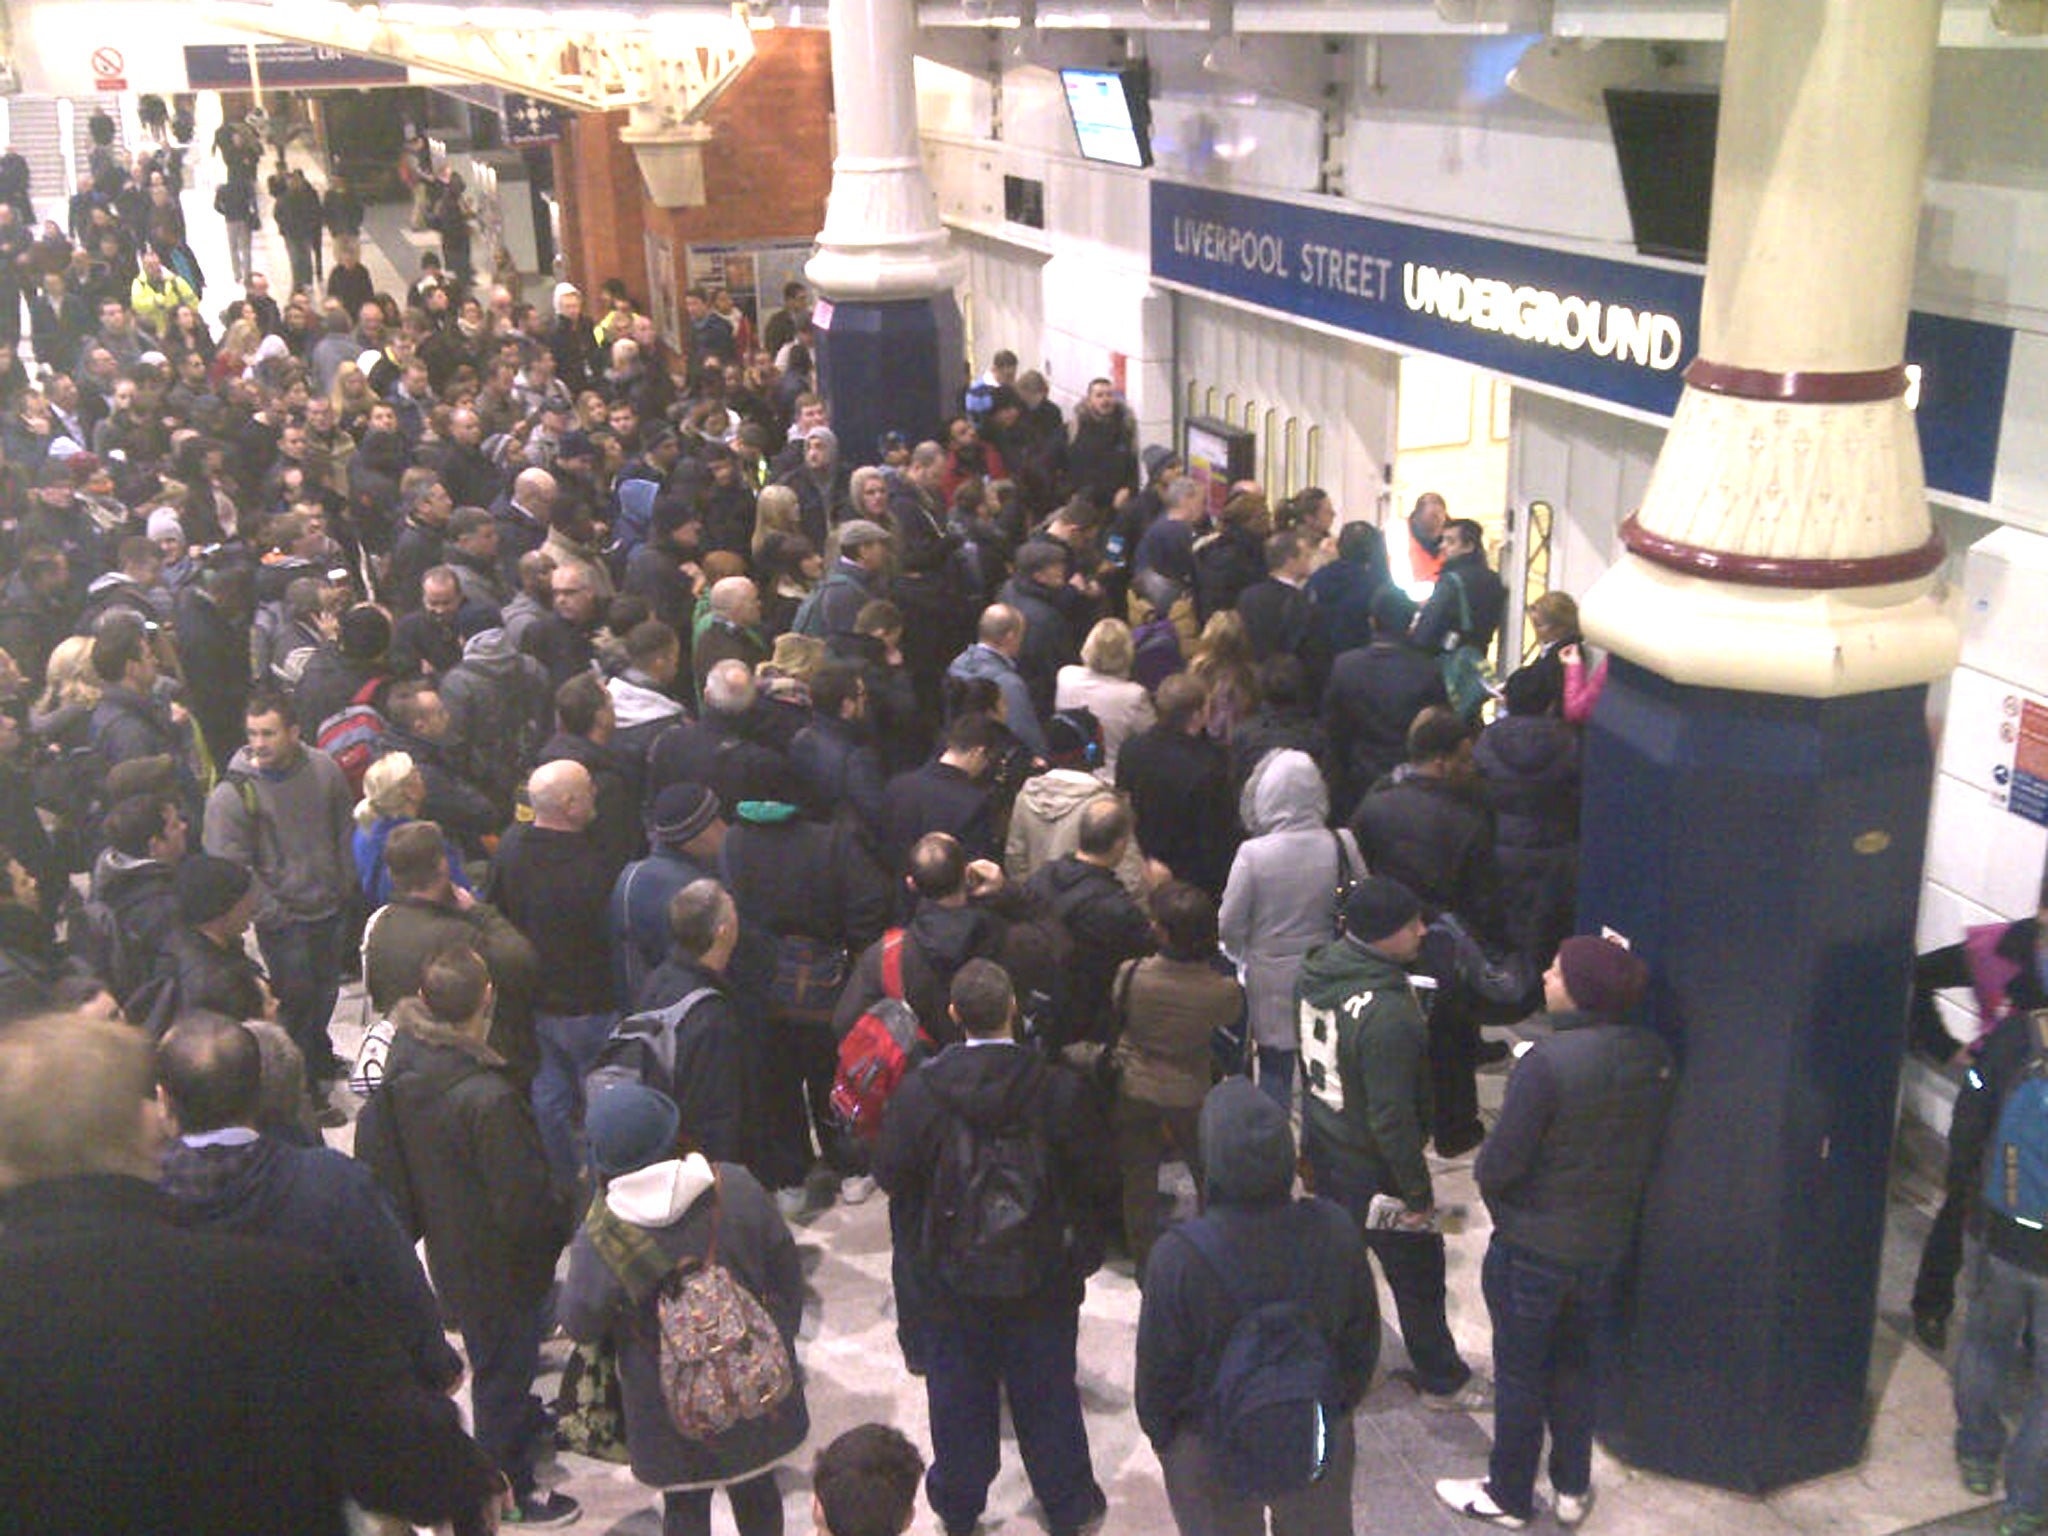 Crowds wait for the 7am opening of the restricted Tube lines at Liverpool Street